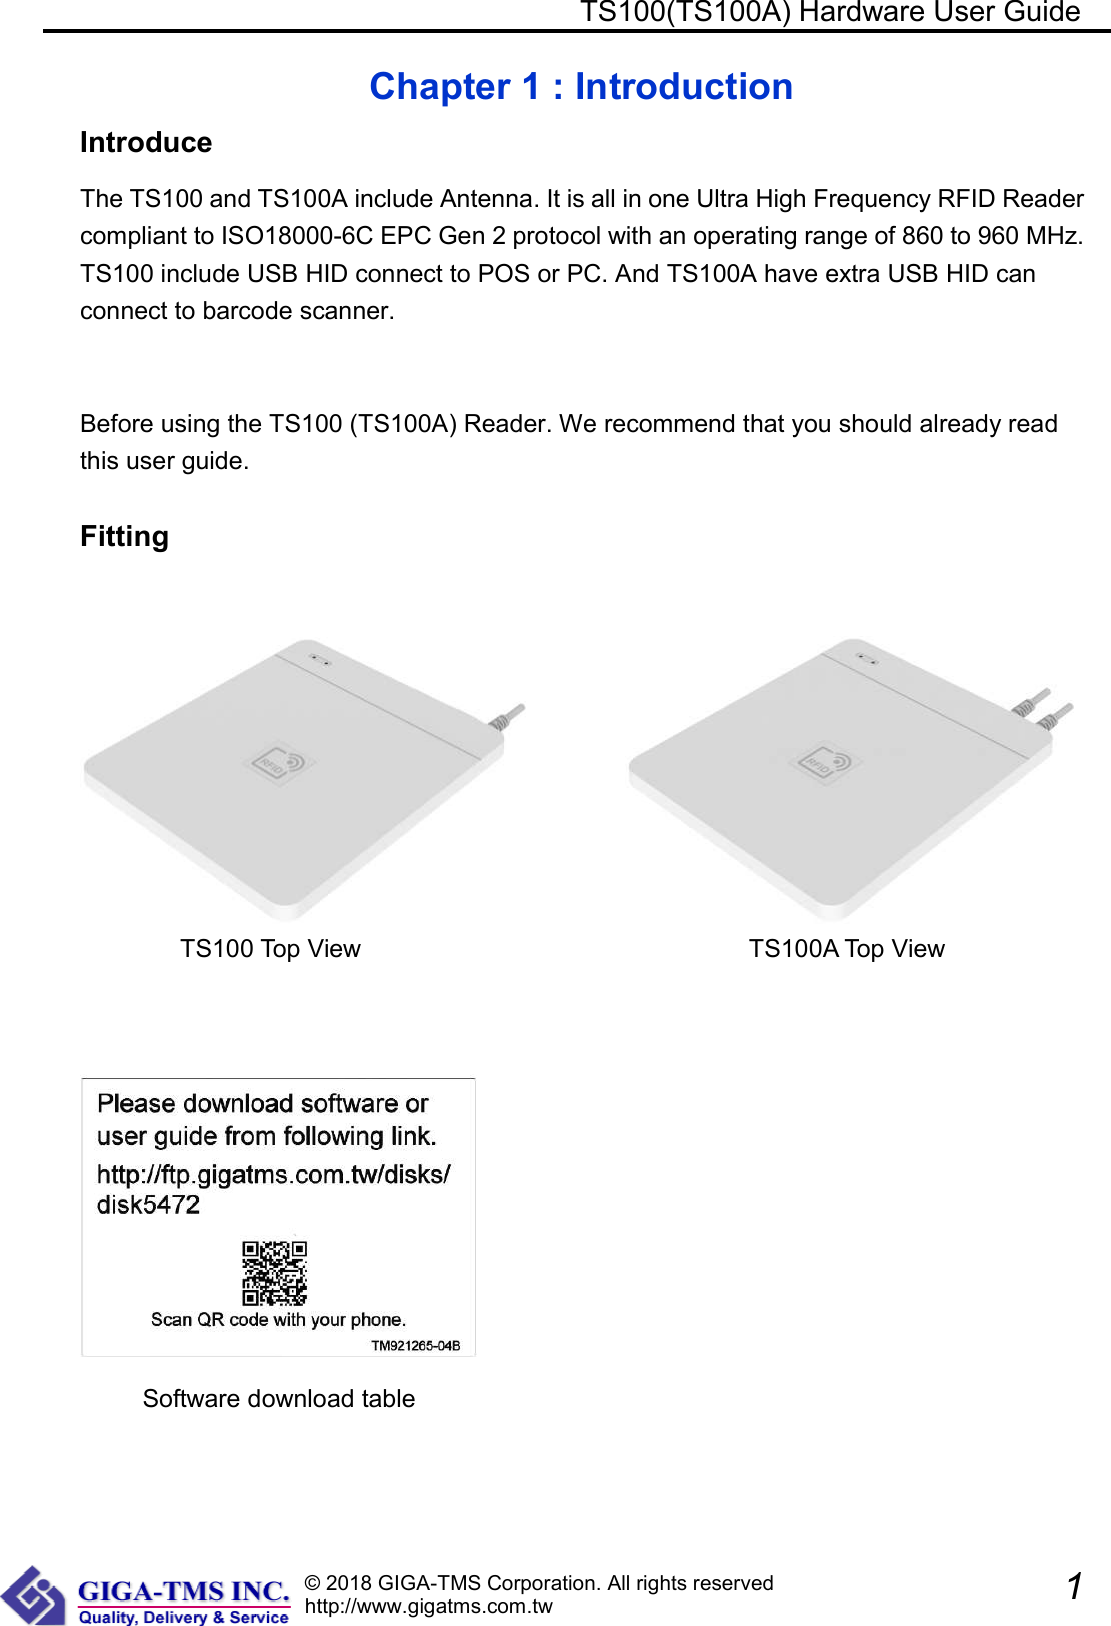 © 2018 GIGA-TMS Corporation. All rights reserved http://www.gigatms.com.tw                                                 TS100(TS100A) Hardware User Guide               1  Chapter 1 : Introduction Introduce The TS100 and TS100A include Antenna. It is all in one Ultra High Frequency RFID Reader compliant to ISO18000-6C EPC Gen 2 protocol with an operating range of 860 to 960 MHz. TS100 include USB HID connect to POS or PC. And TS100A have extra USB HID can connect to barcode scanner.  Before using the TS100 (TS100A) Reader. We recommend that you should already read this user guide.  Fitting               TS100 Top View                                                              TS100A Top View                                   Software download table 